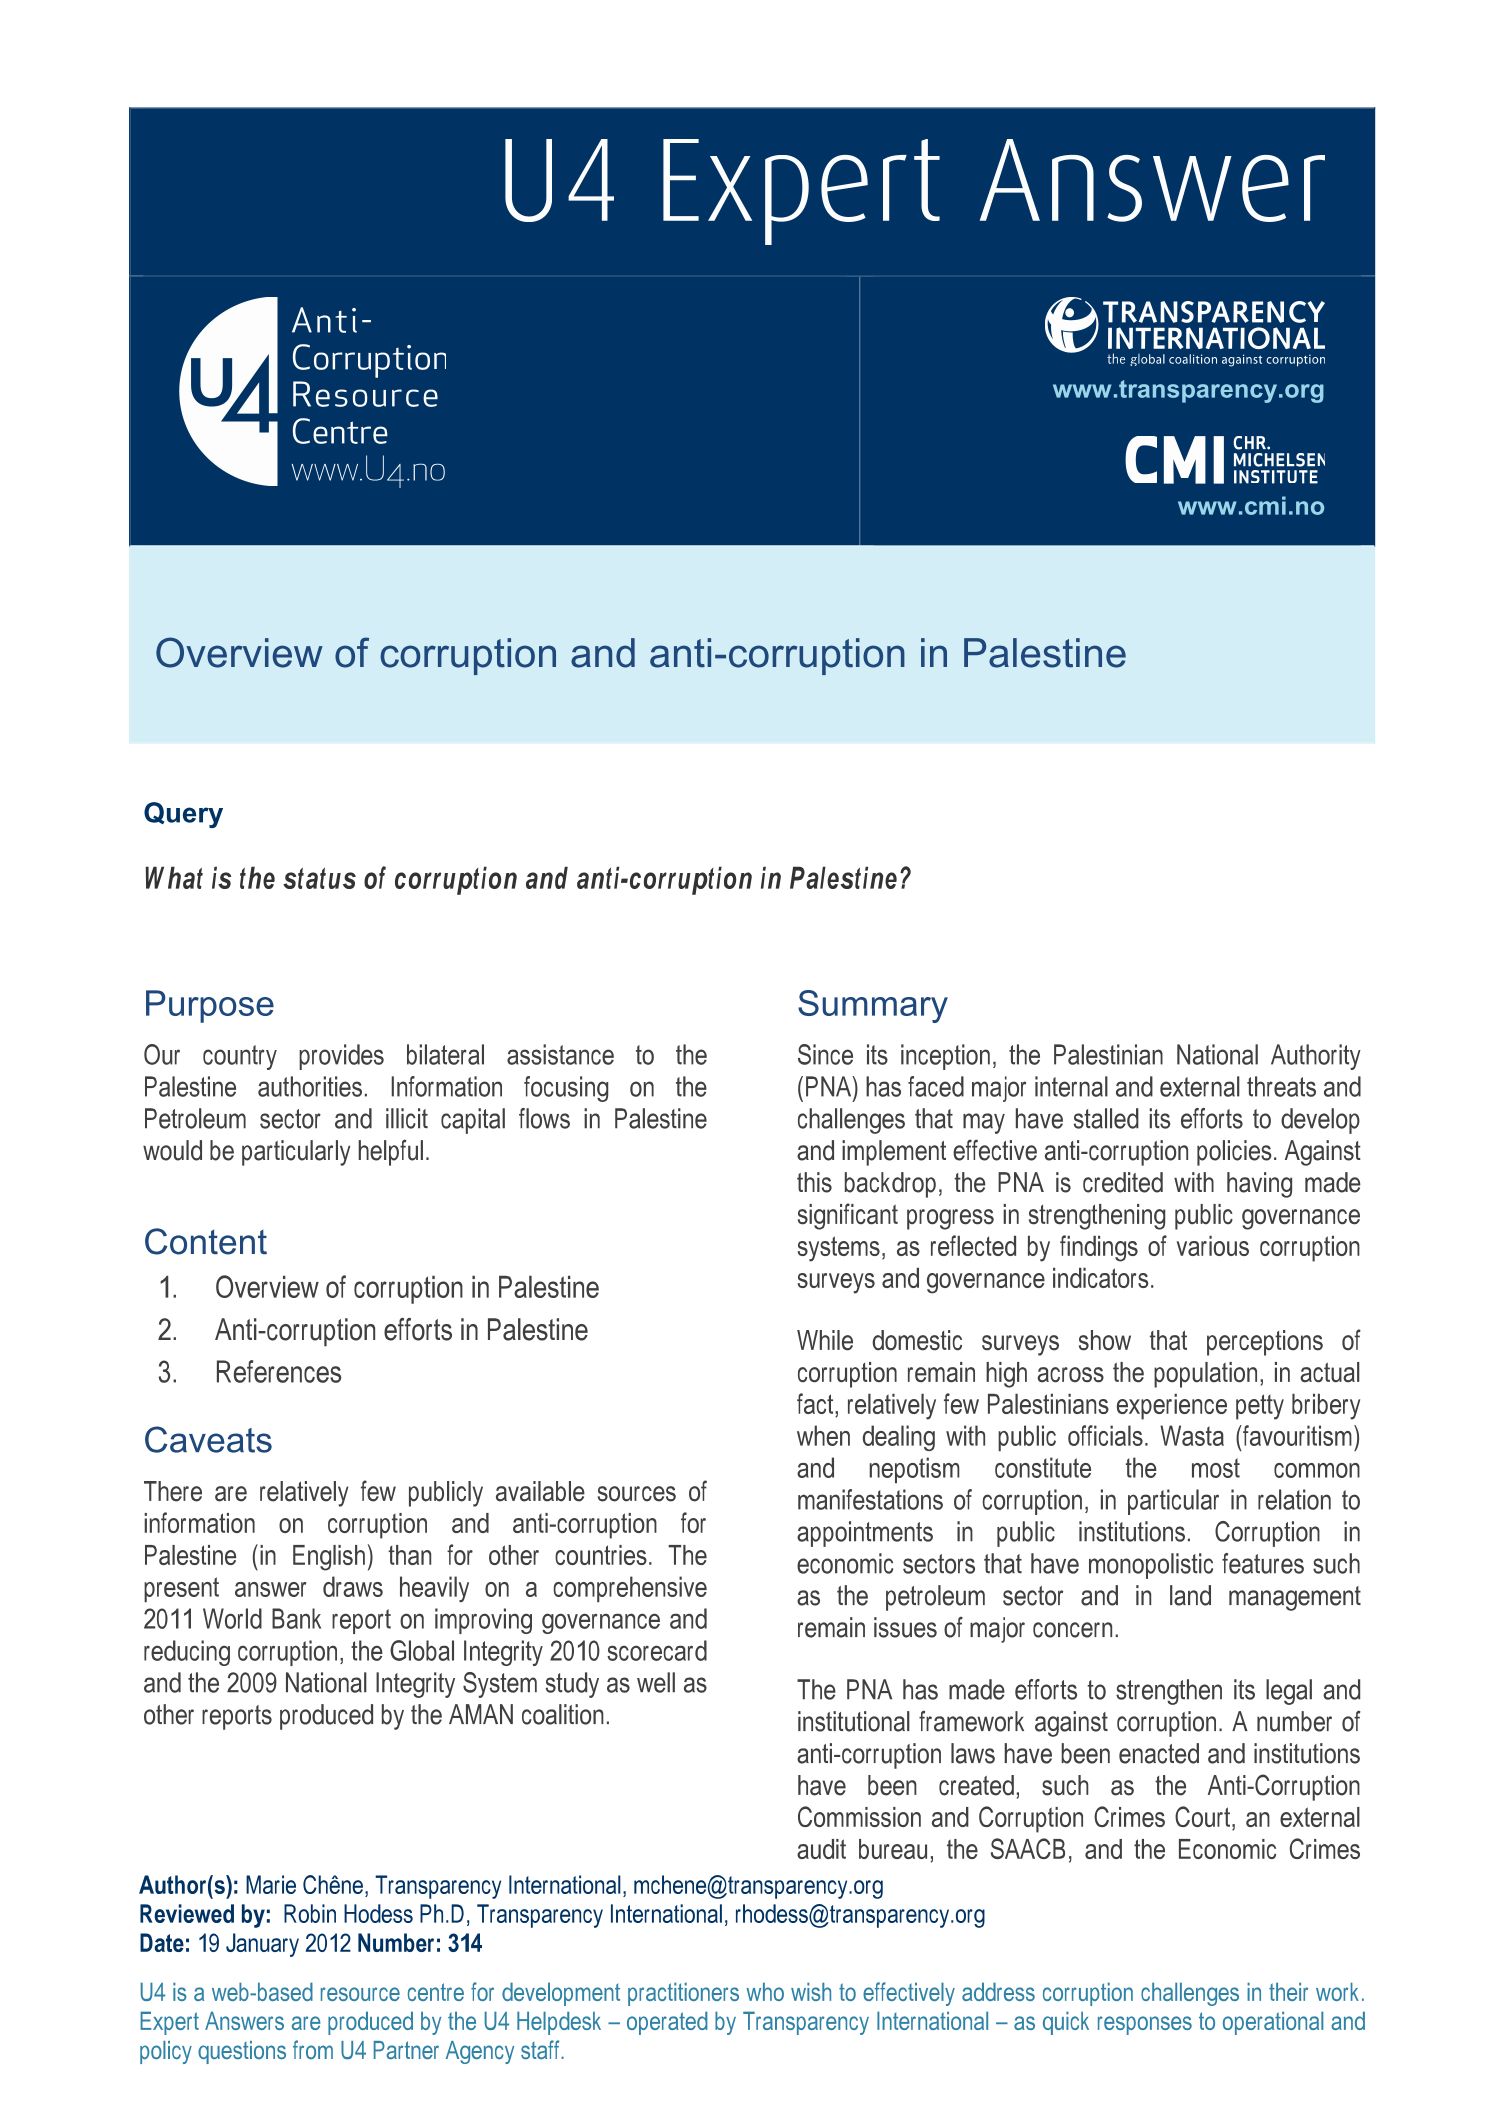 Overview of corruption and anti-corruption in Palestine